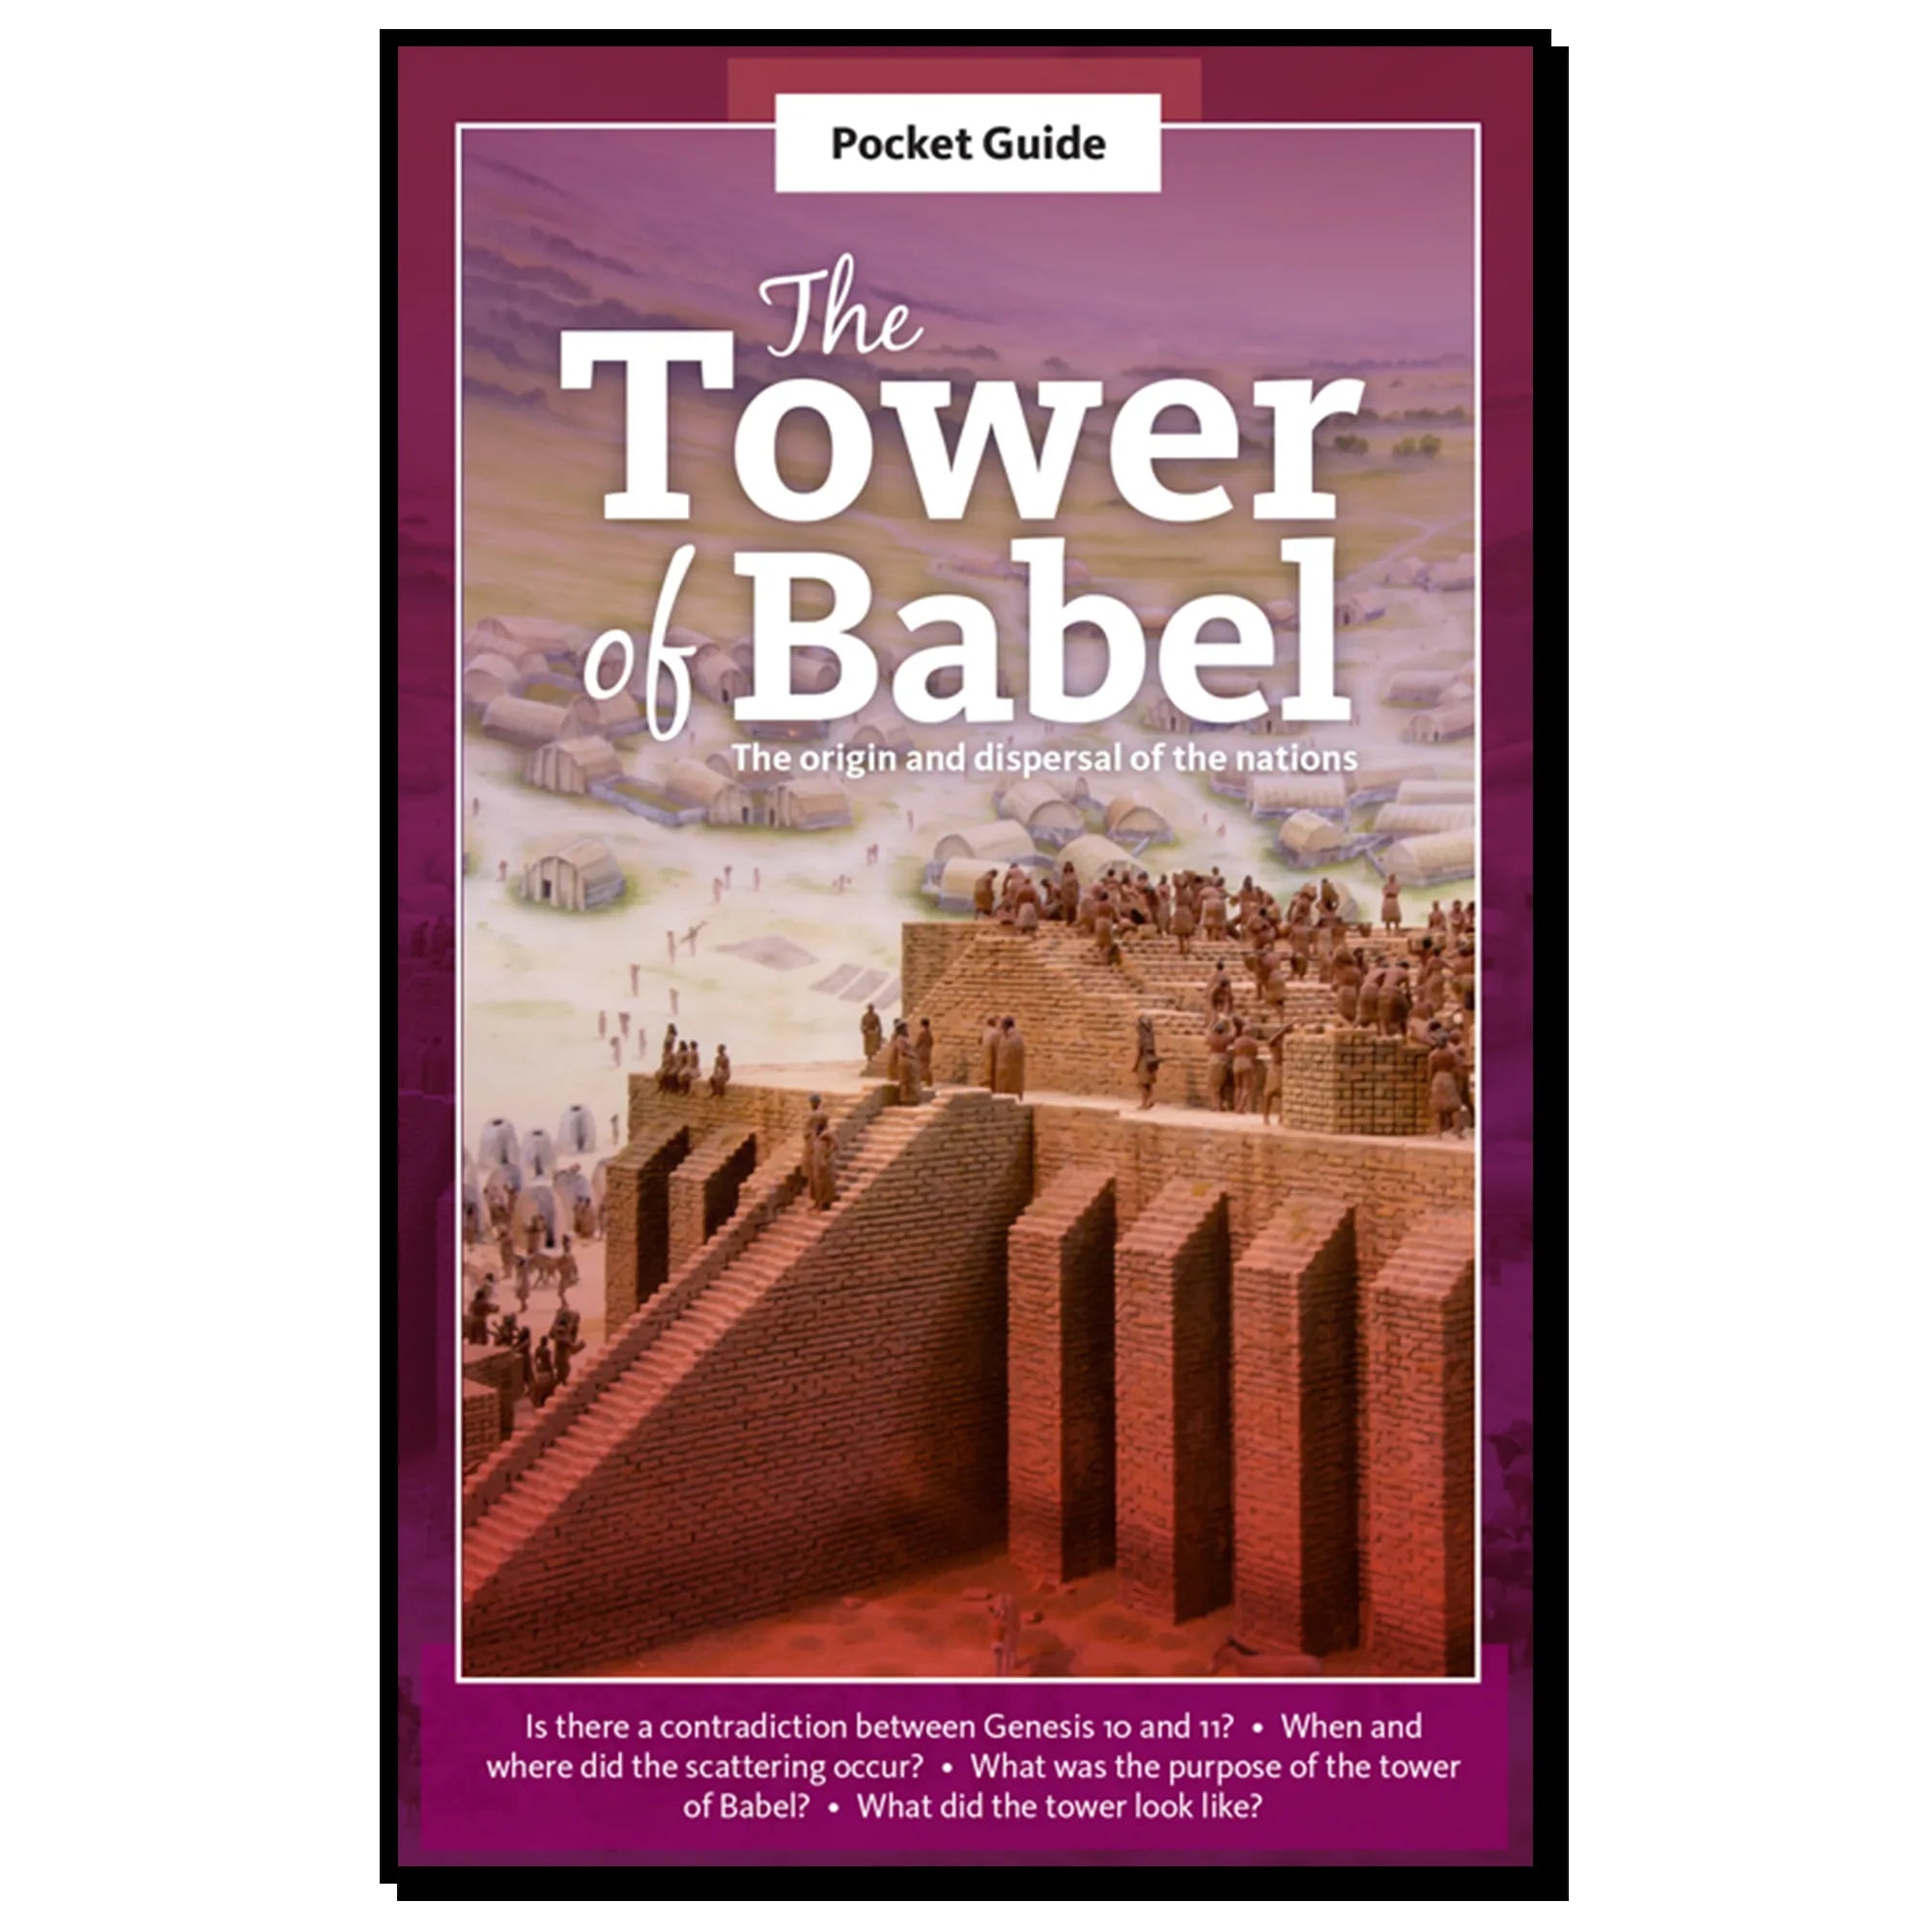 Pocket Guide - The Tower of Babel: The Origin and Dispersal of the Nations - 96 Pages - Brown's Hobby & Game